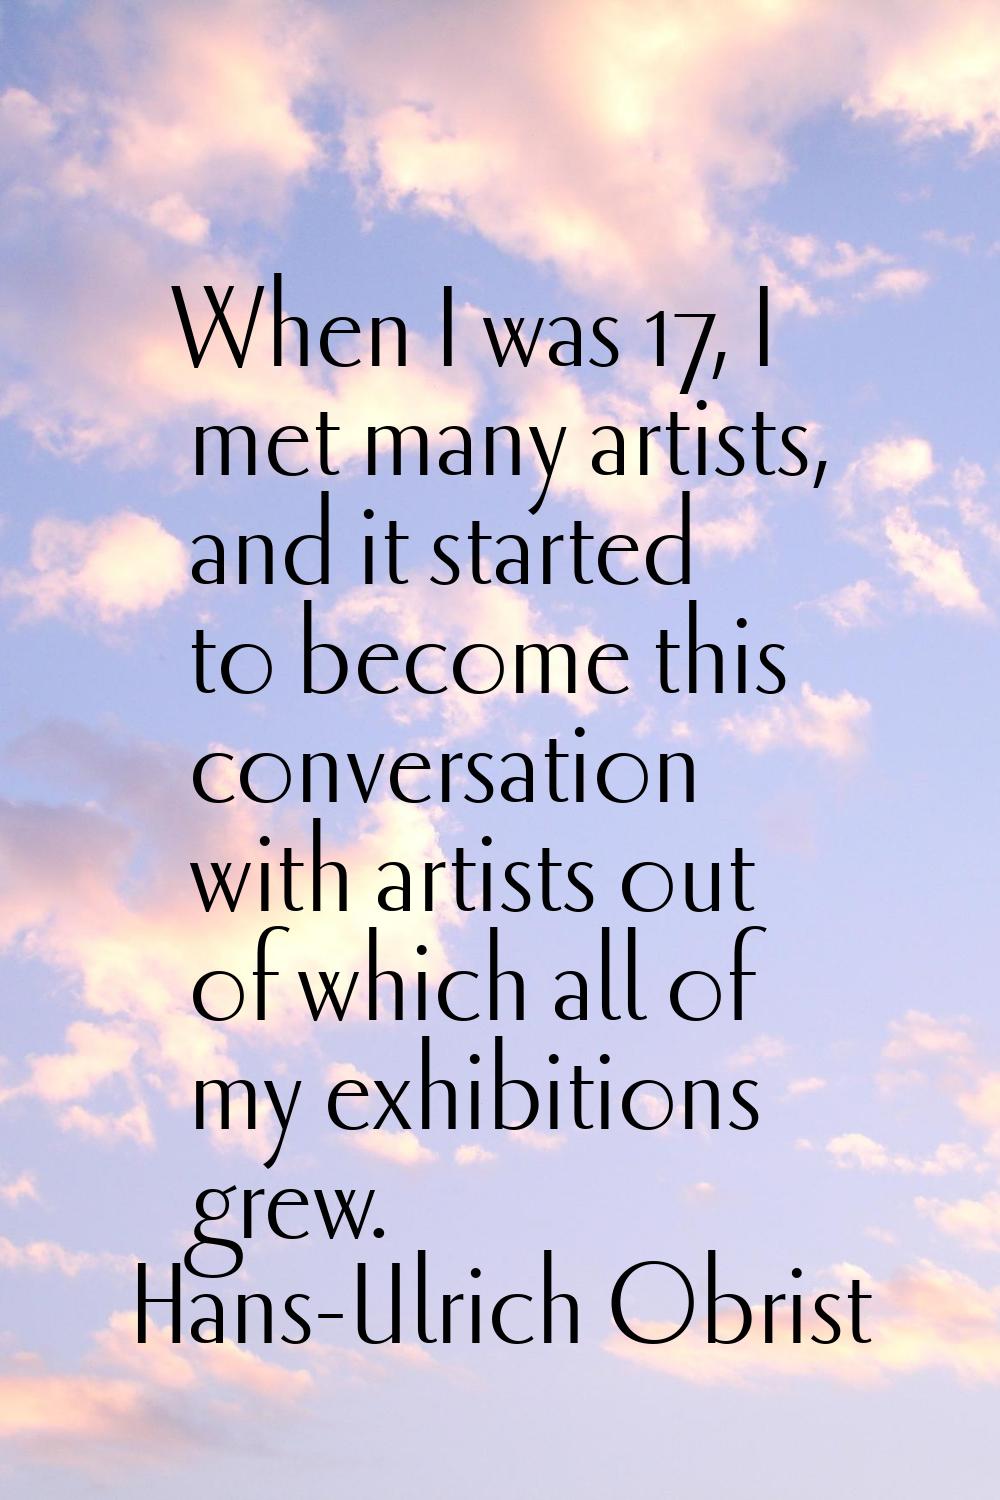 When I was 17, I met many artists, and it started to become this conversation with artists out of w